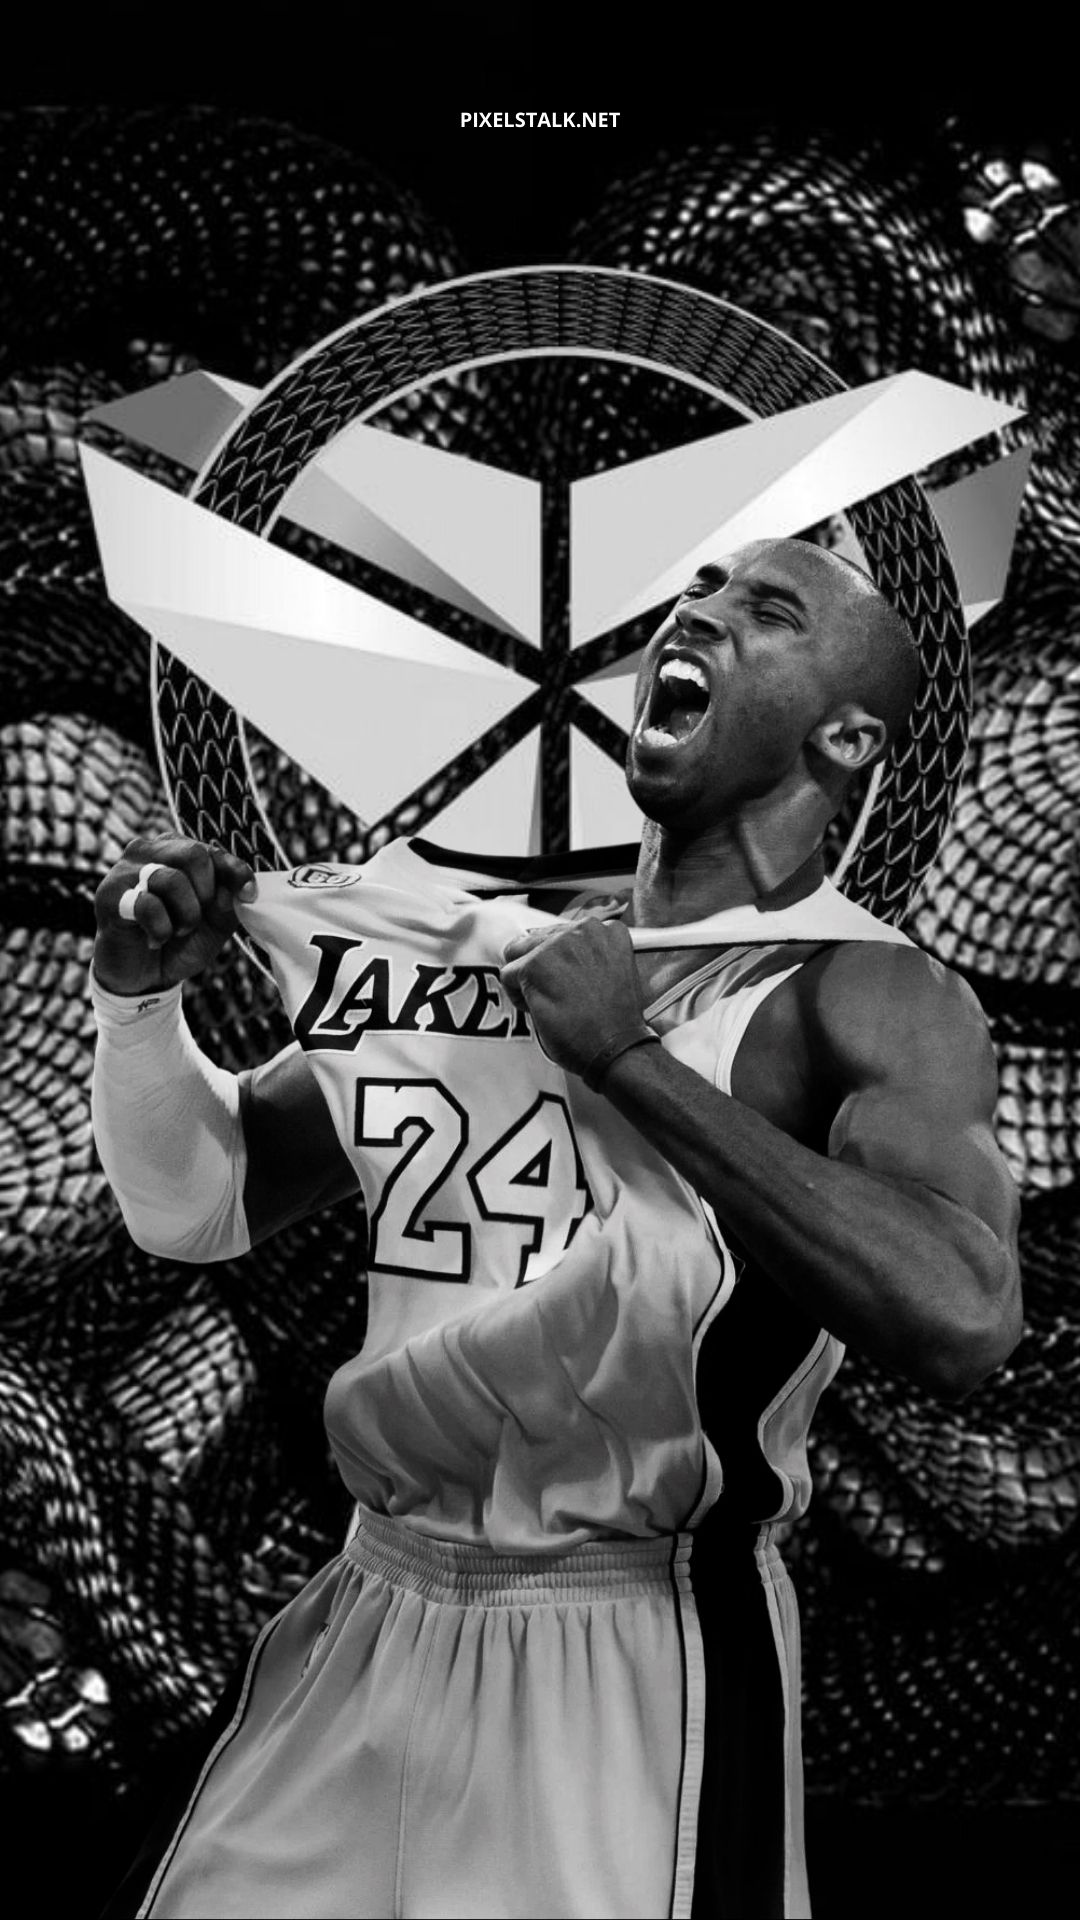 Kobe Bryant wallpaper for iPhone and Android devices. You can download this wallpaper for your device by clicking the link below. - Kobe Bryant